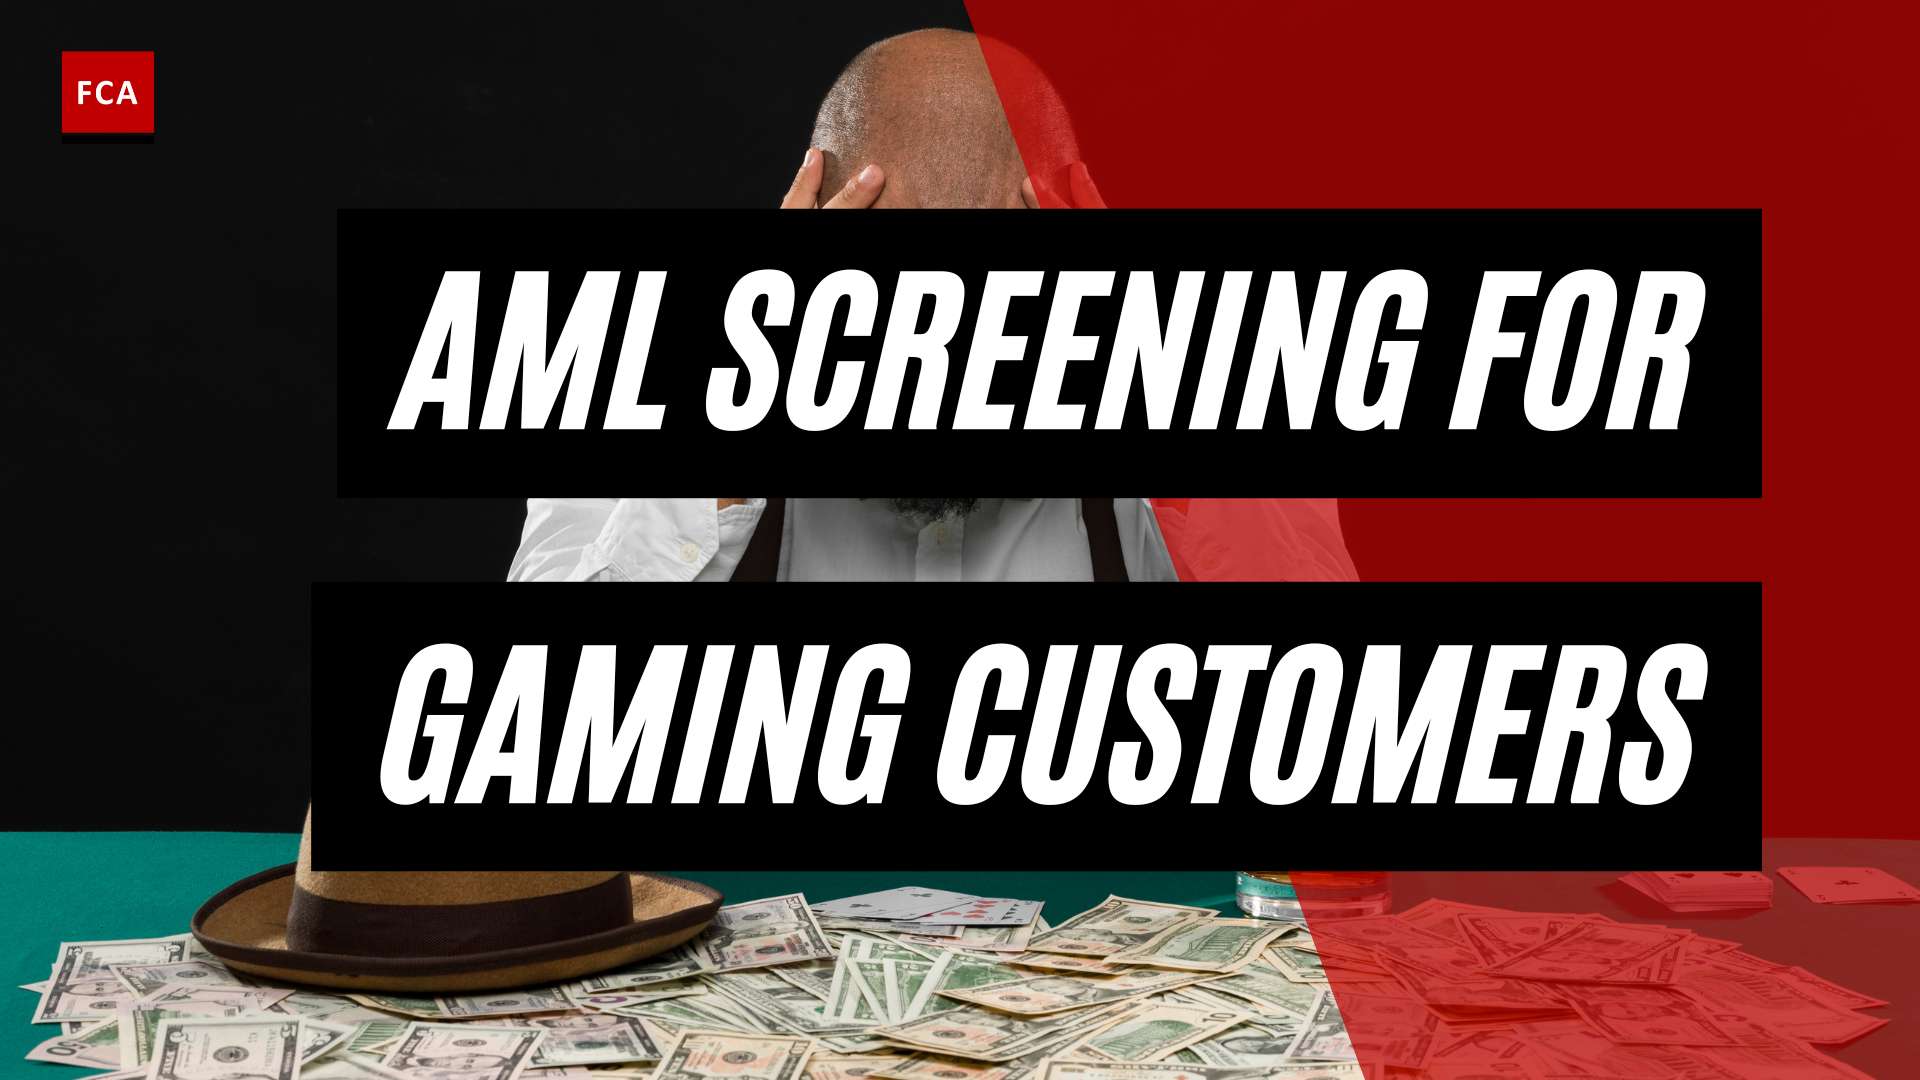 Keeping The Game Fair: Aml Screening For Gaming Customers